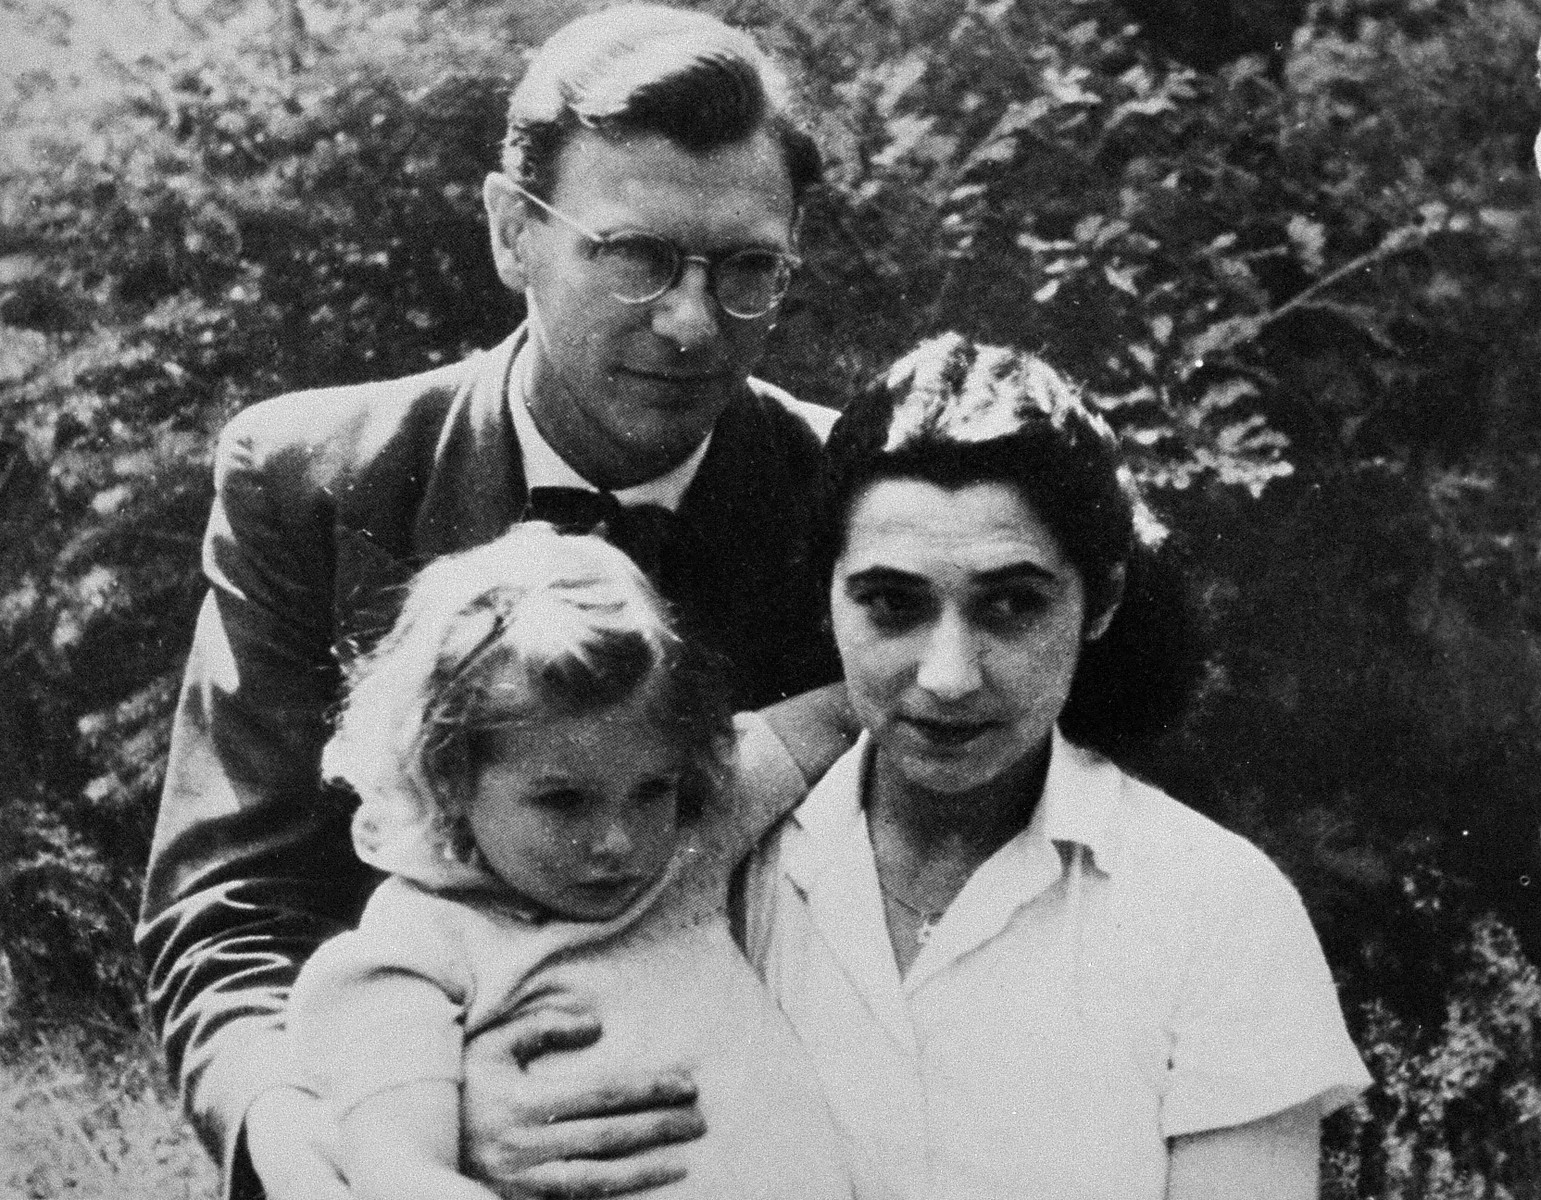 Group portrait of the Brilleslijper family.  

Lientje Brilleslijper, a Dutch Jewish woman, and her common law German husband hid Jews during the war.  On July 12, 1944, they were arrested by the SS while their child was left in the house under guard.  The following day Marion Pritchard rescued their daughter Kathinka and hid her.  She and her parents were reunited after the war.